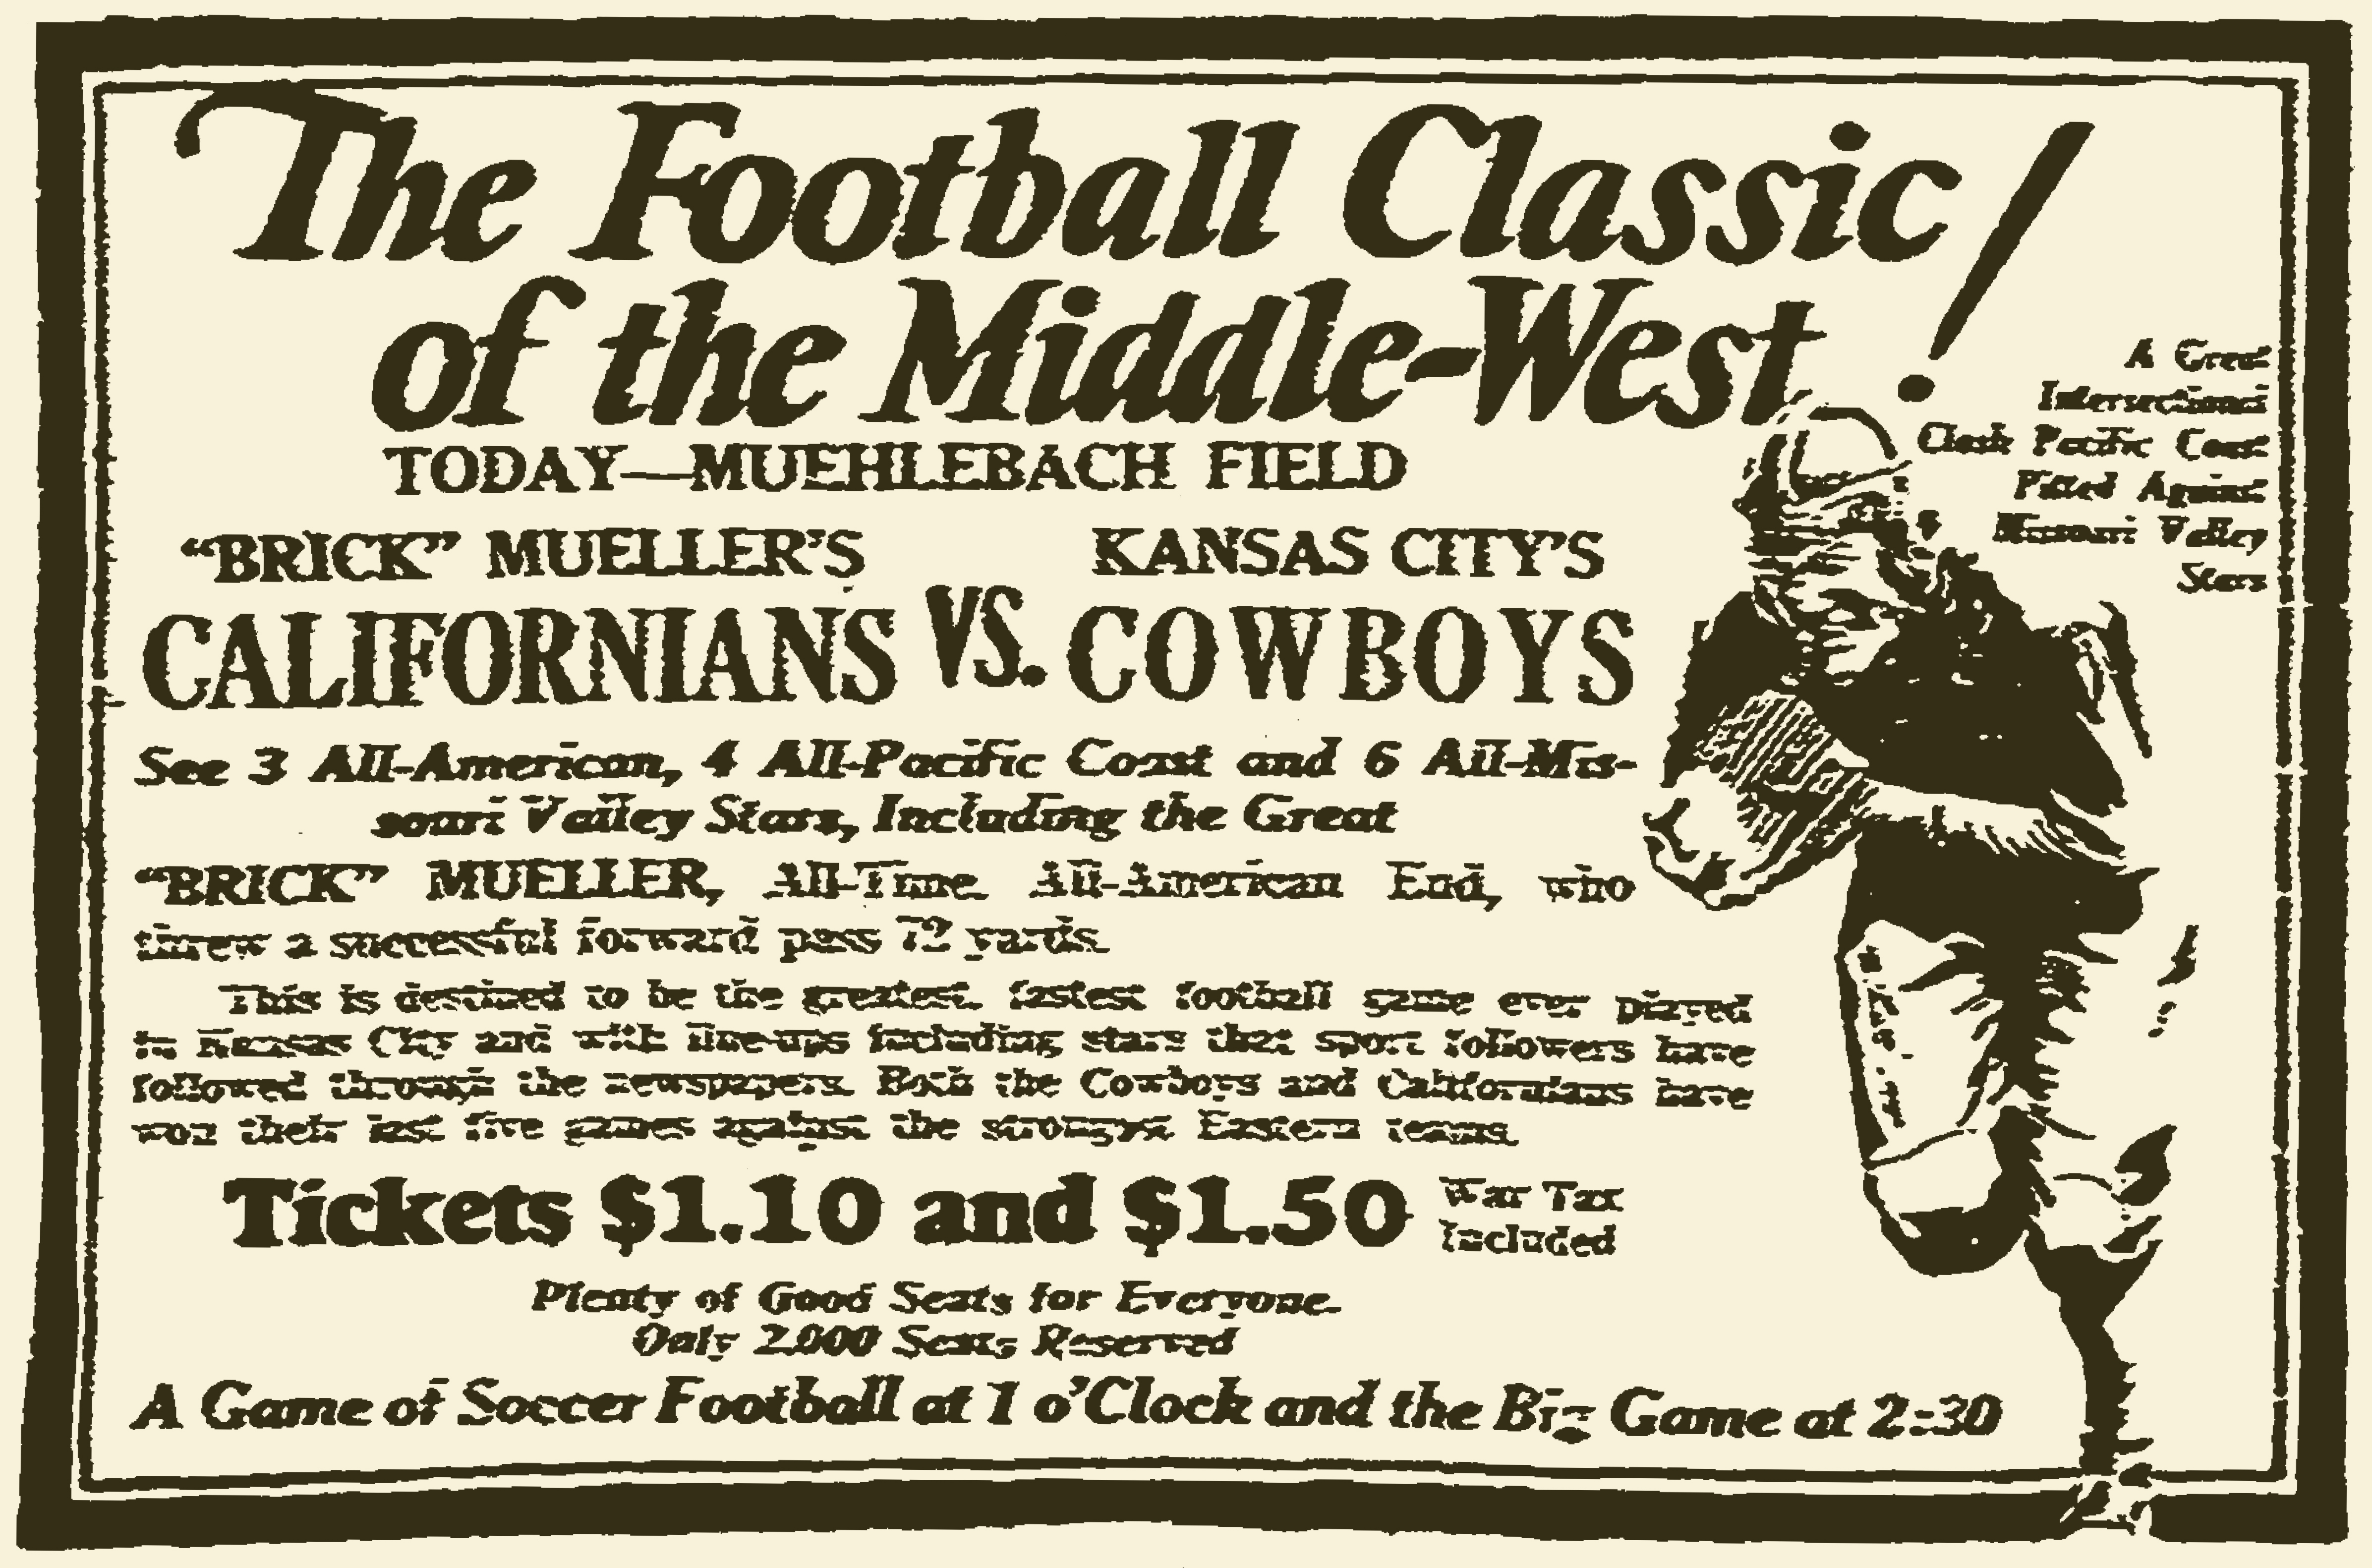 Ad for a Cowboys game at Muehlebach Field on December 5, 1926. THE KANSAS CITY STAR